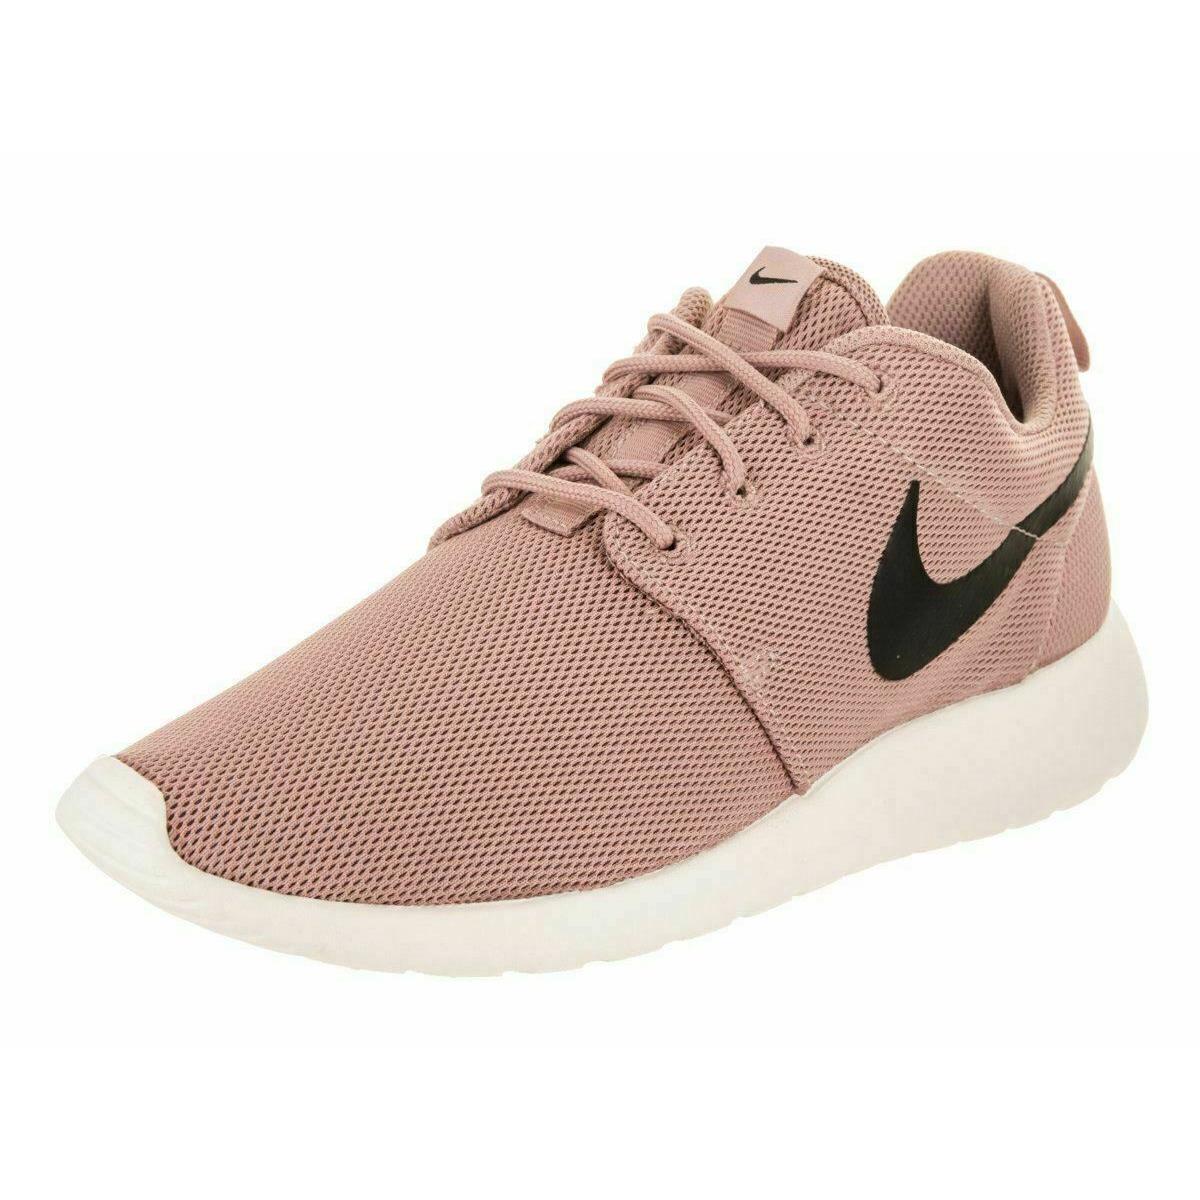 Nike shoes Roshe One - Brown & White 11